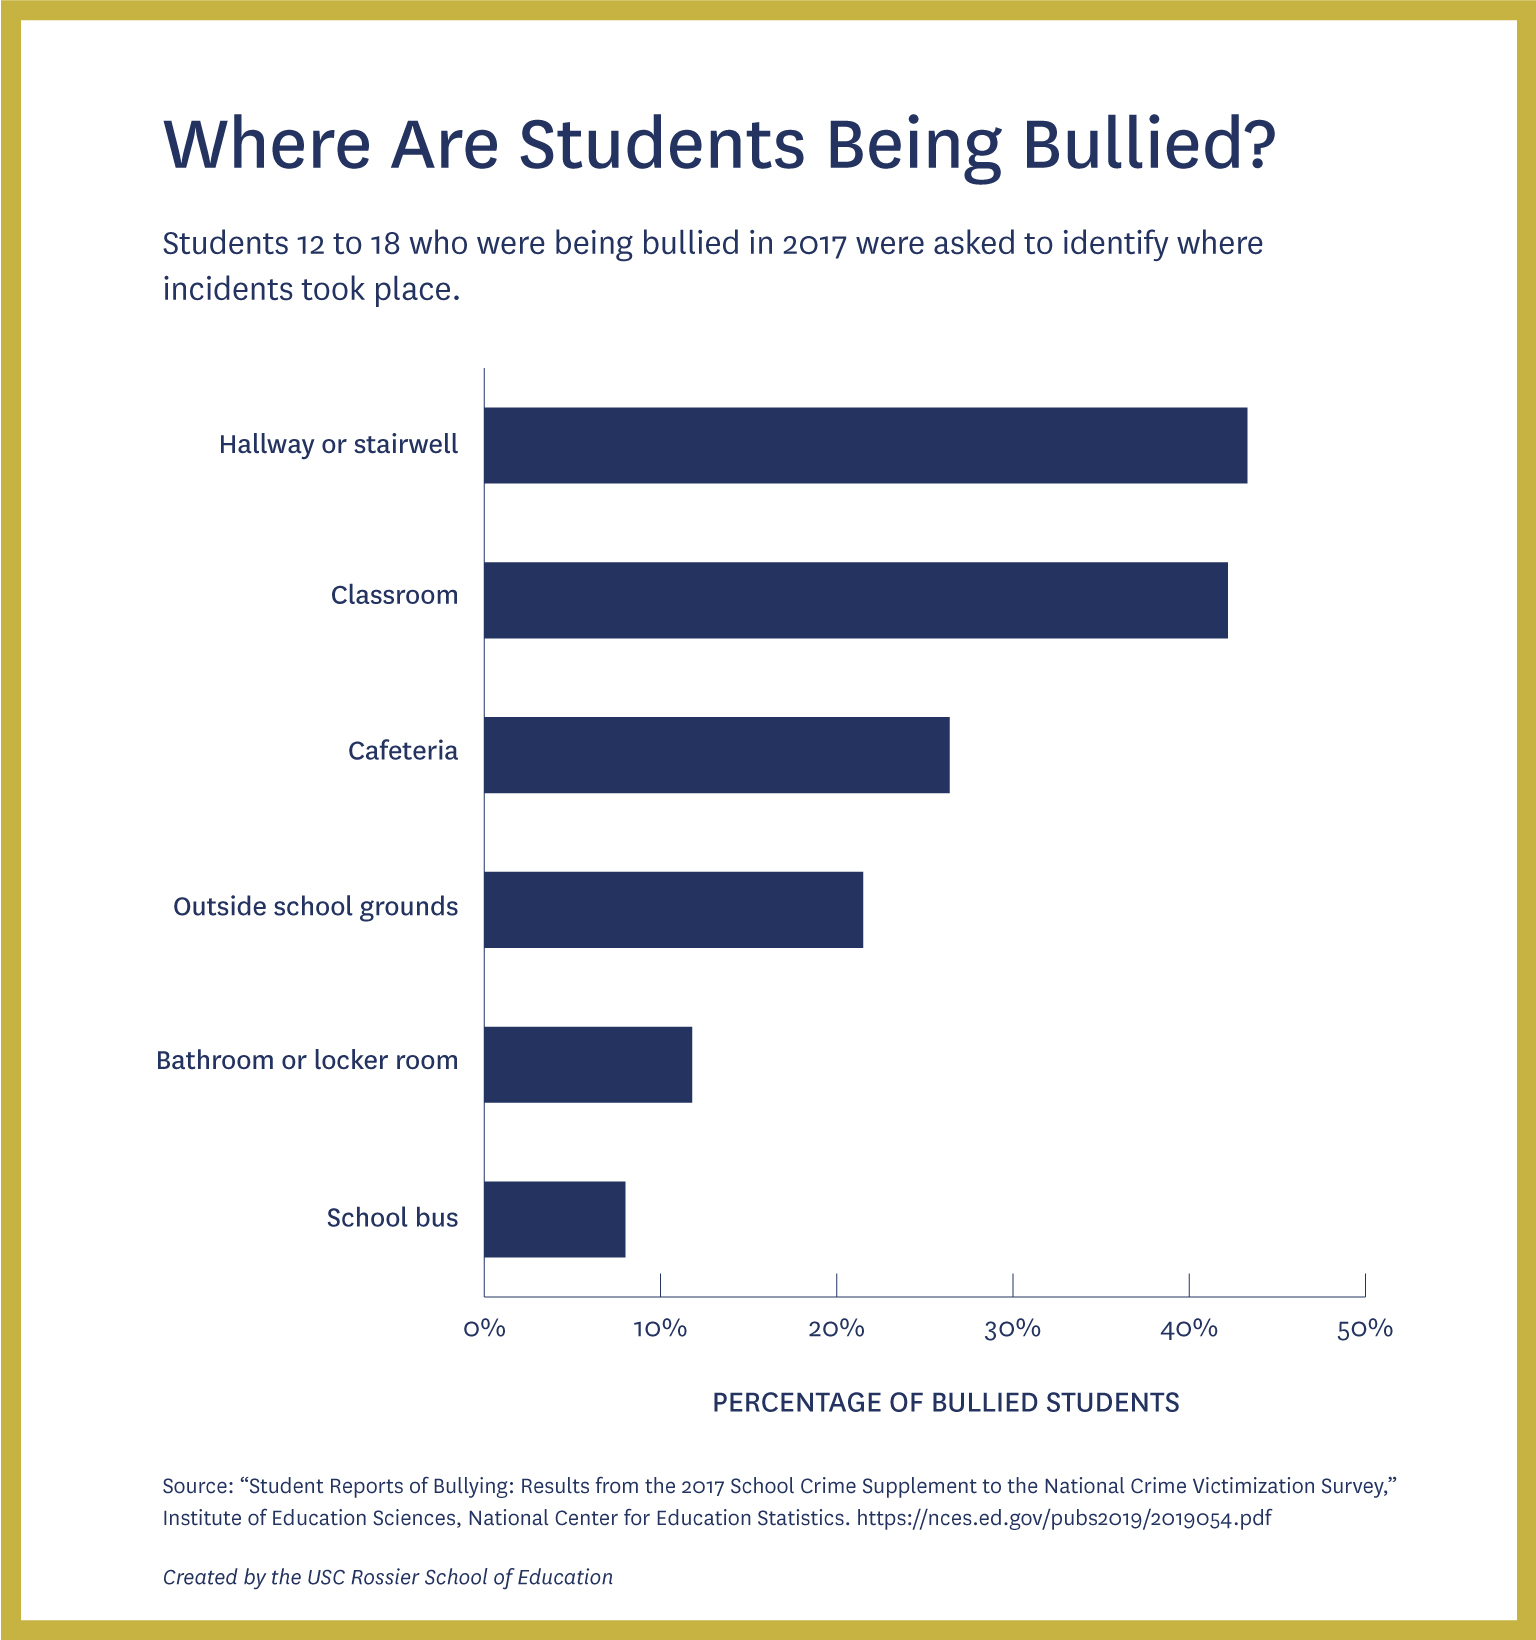 Bar graph showing the percentage of students who were bullied in specific locations in school.